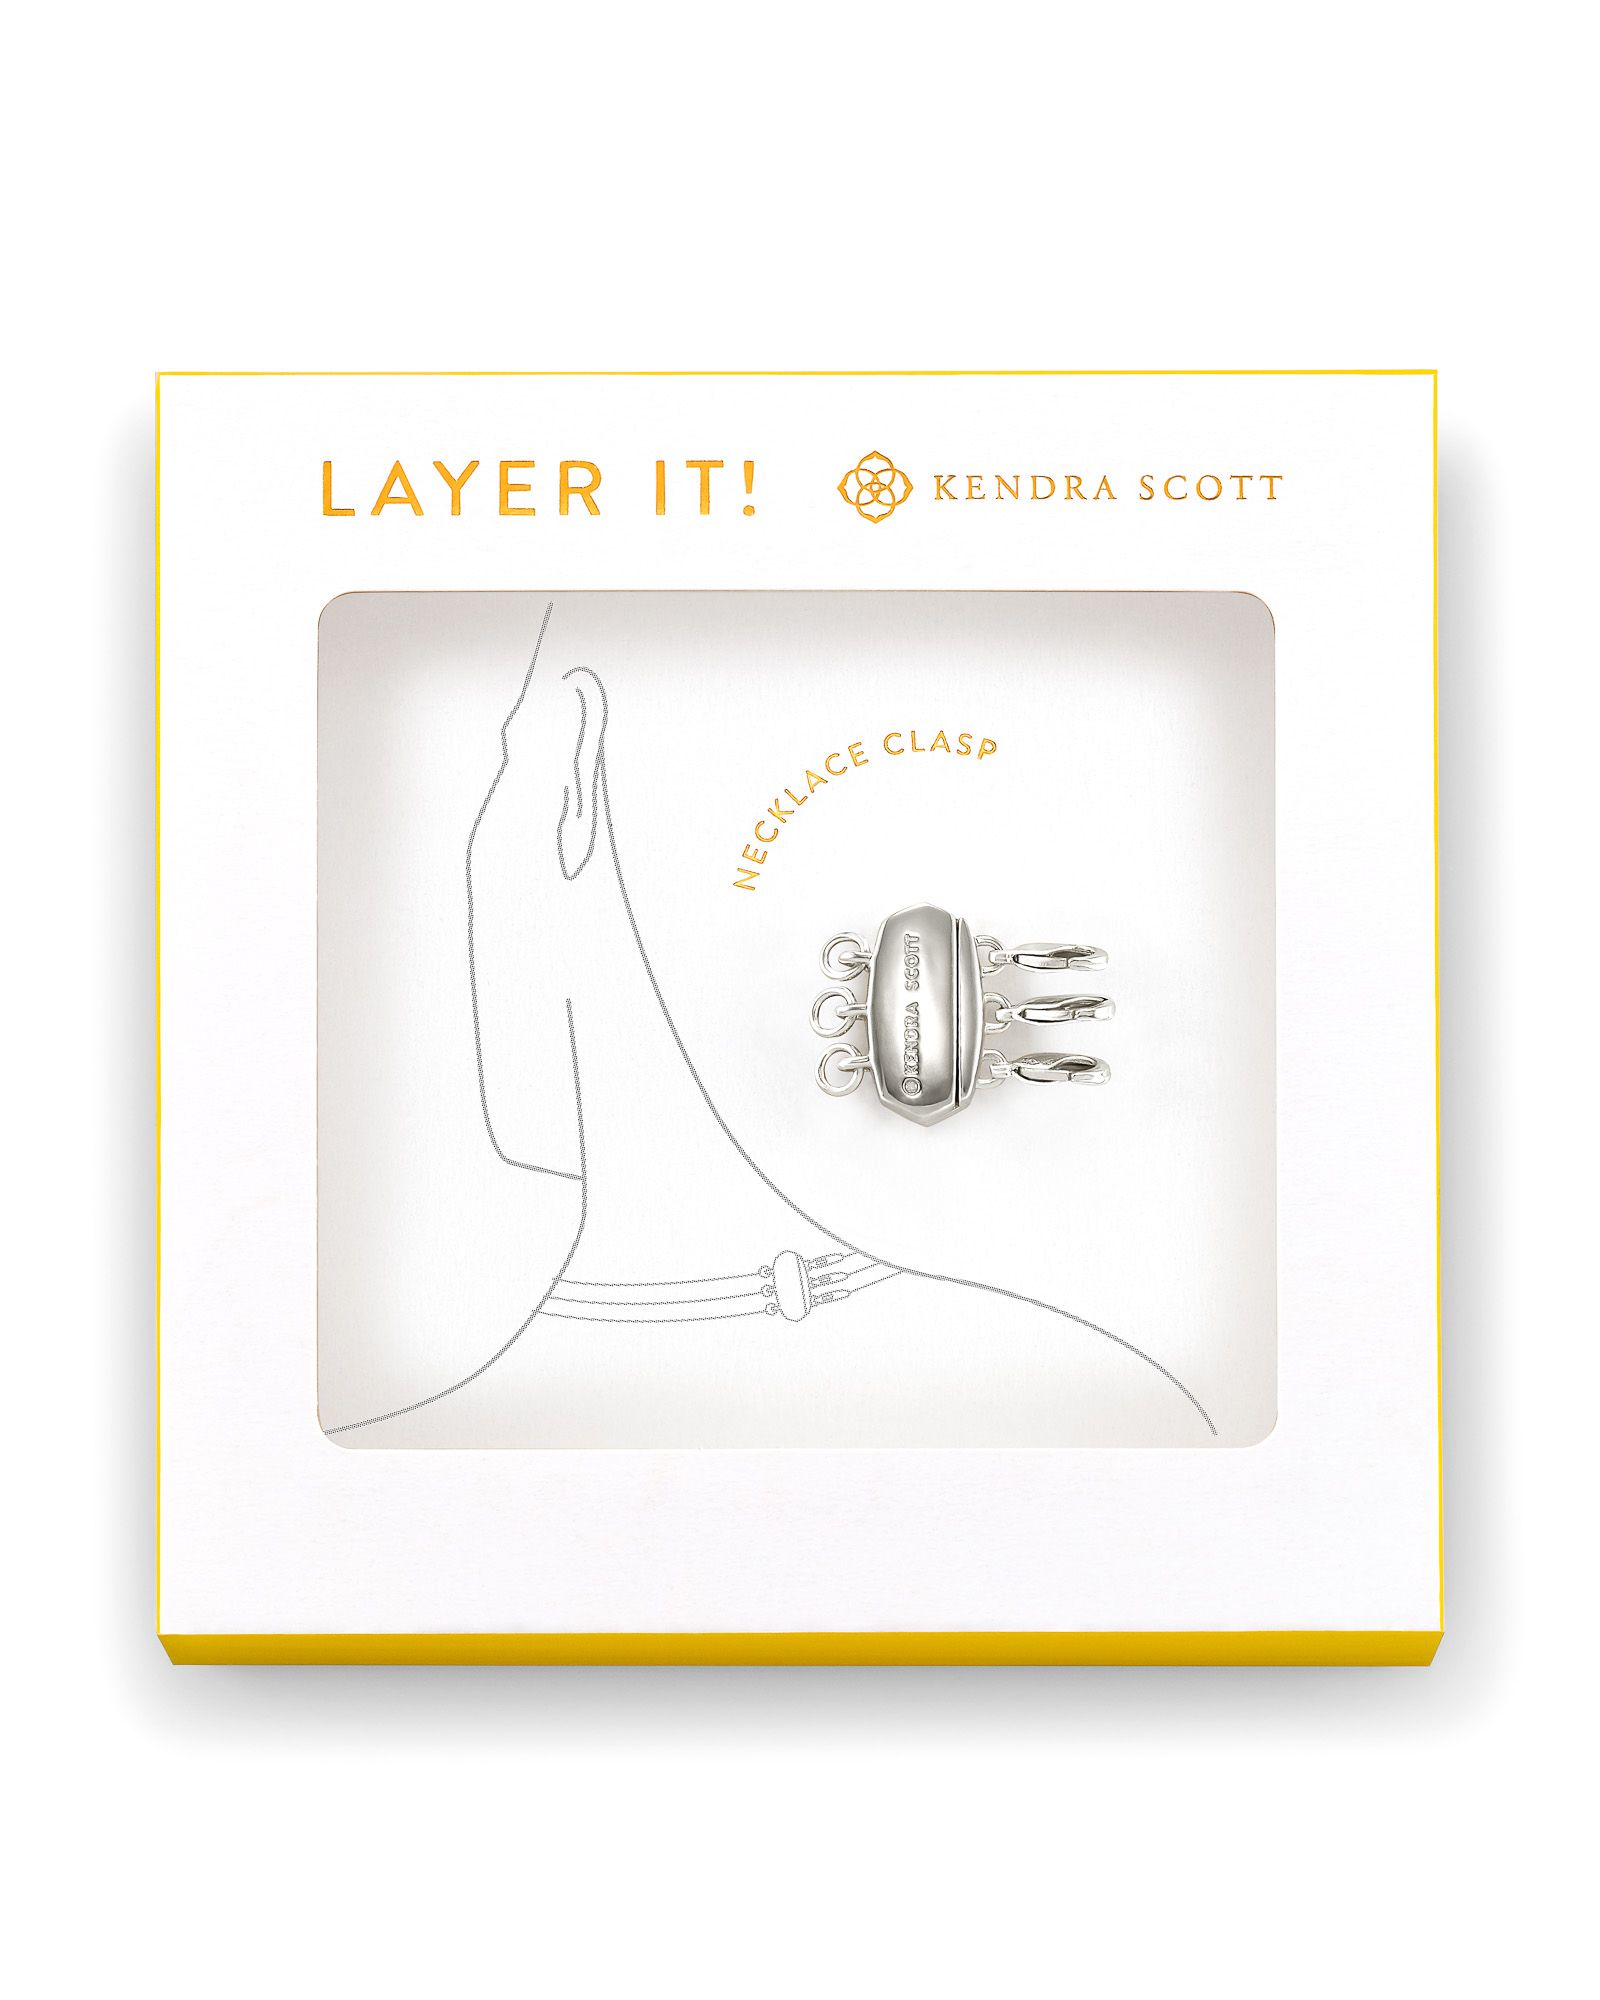 Layer It! Necklace Clasp in Silver | Kendra Scott